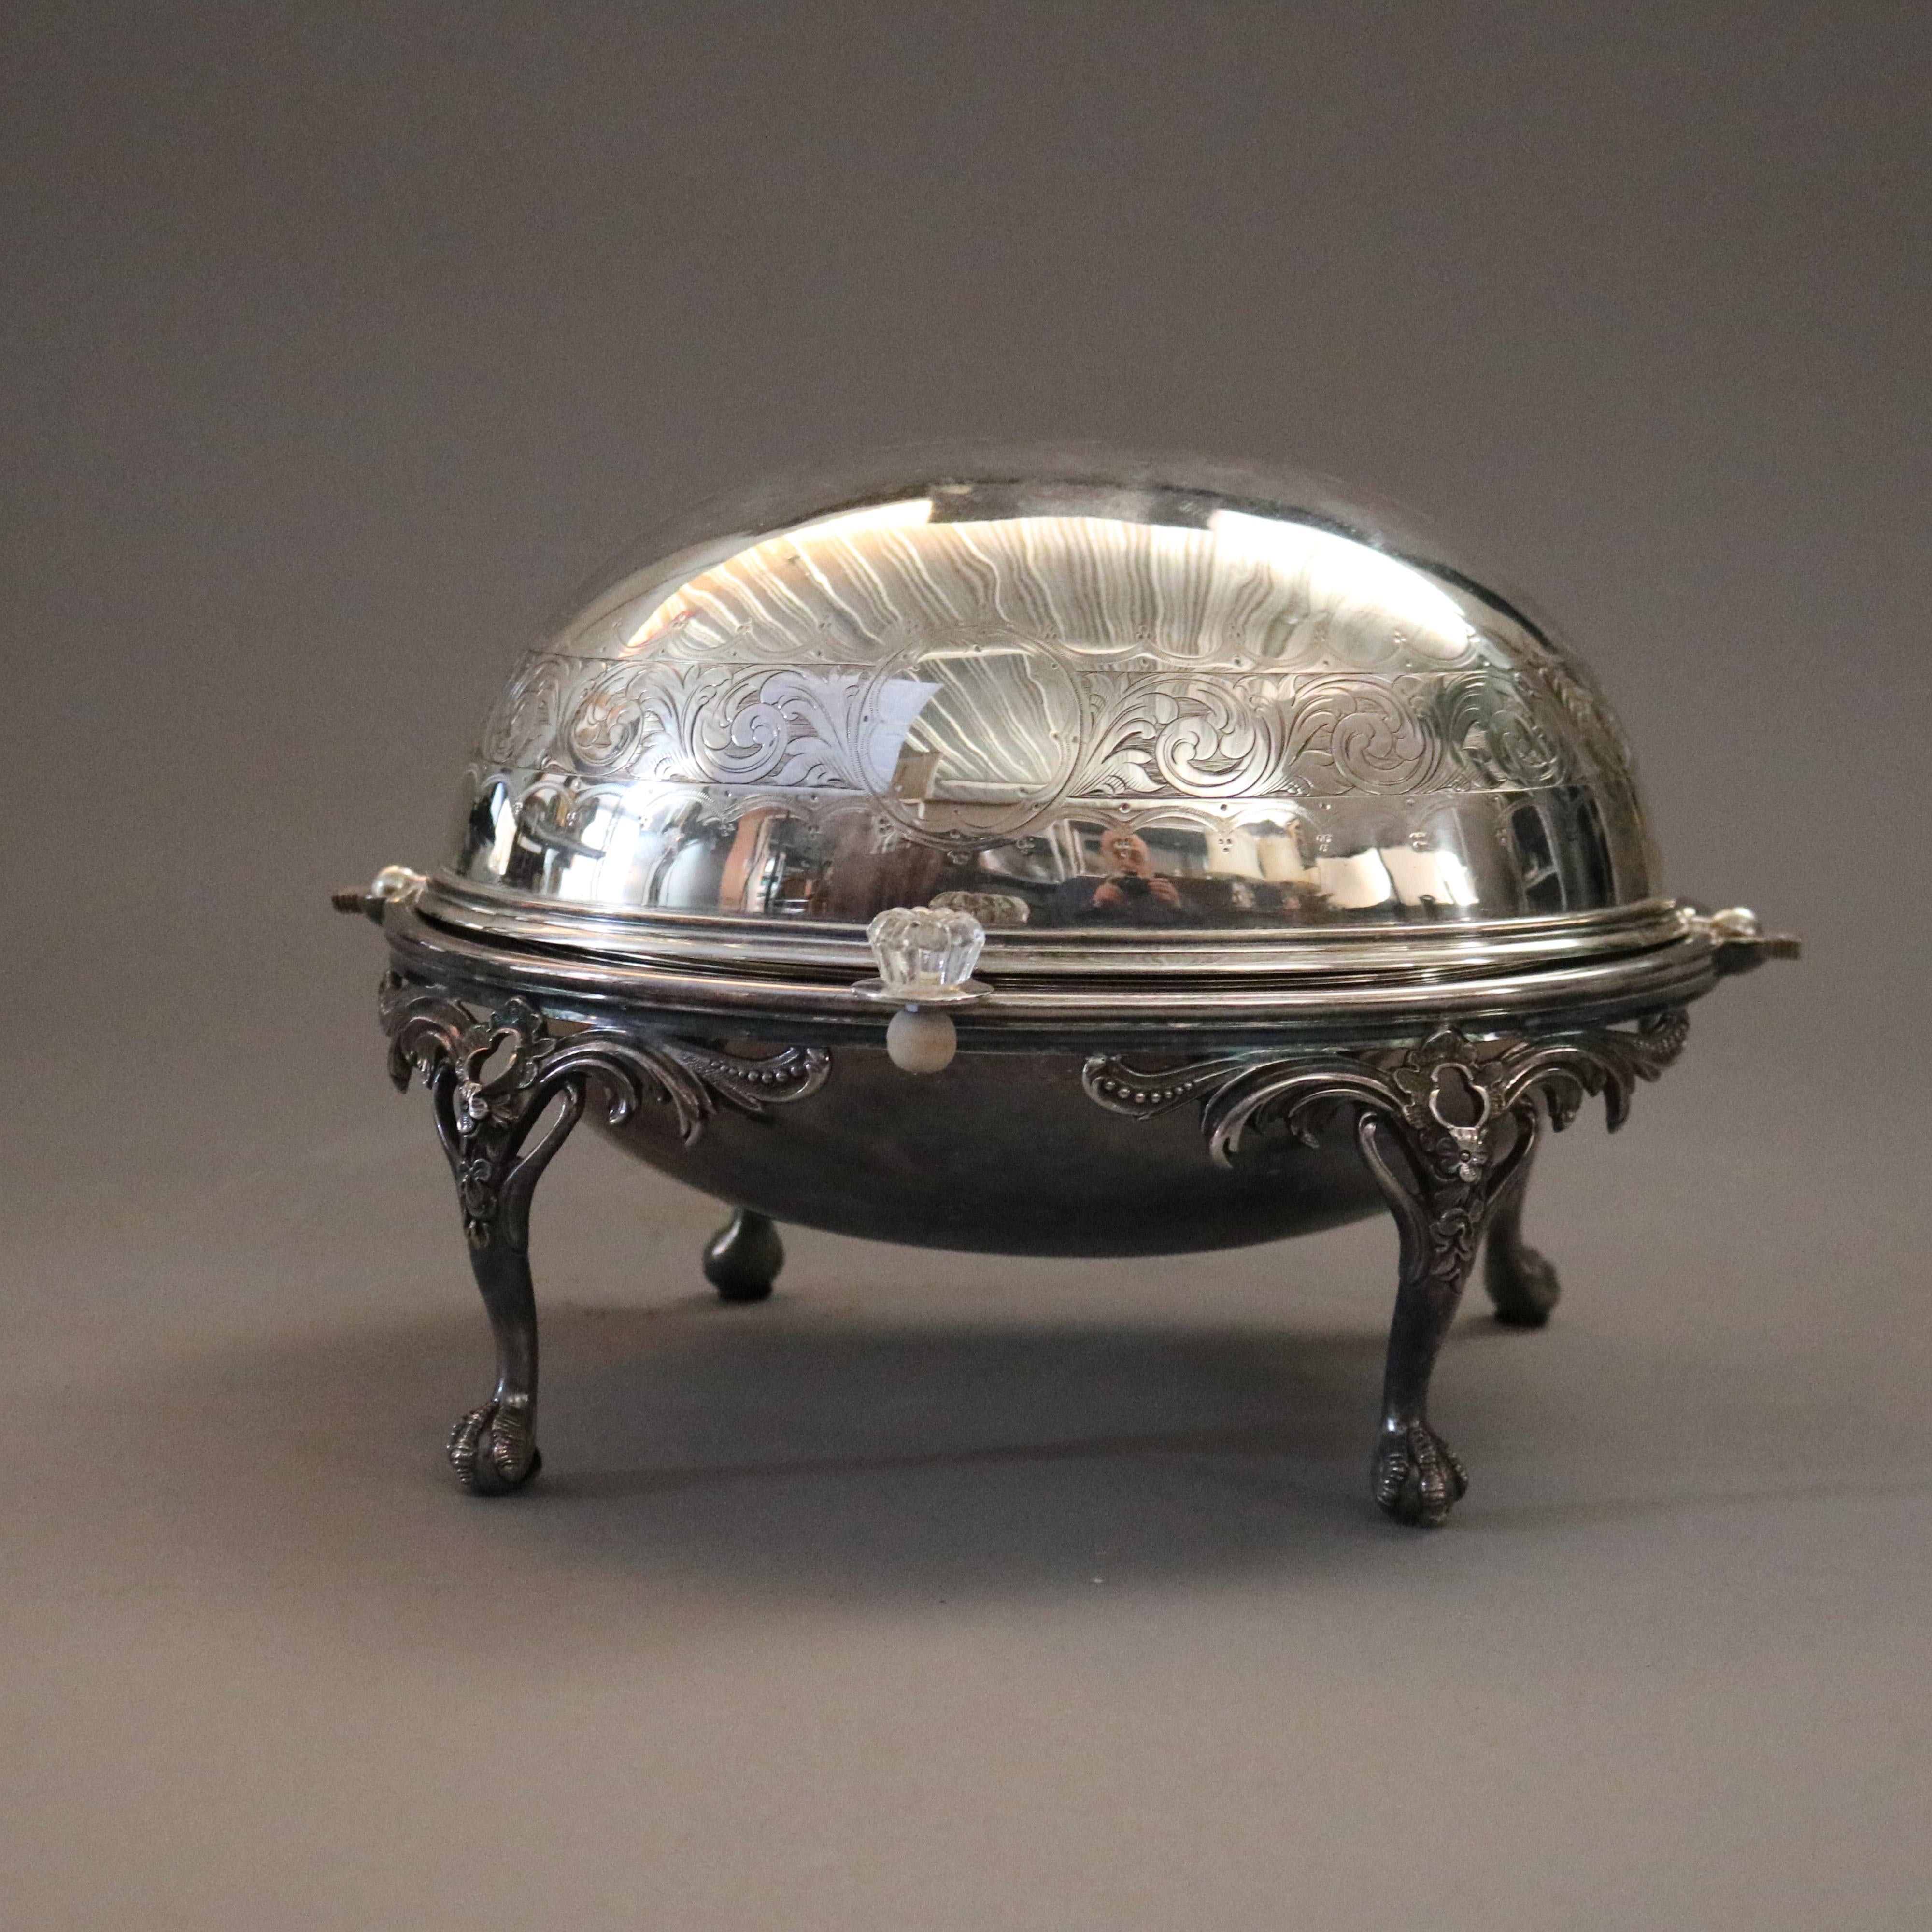 An English silver plate serving dish offers swivel dome top having engraved acanthus band and raised on cabriole legs with foliate capitals and terminating in claw and ball feet, 20th century.

Measures - 8''H X 12.5''W X 9.75''D.